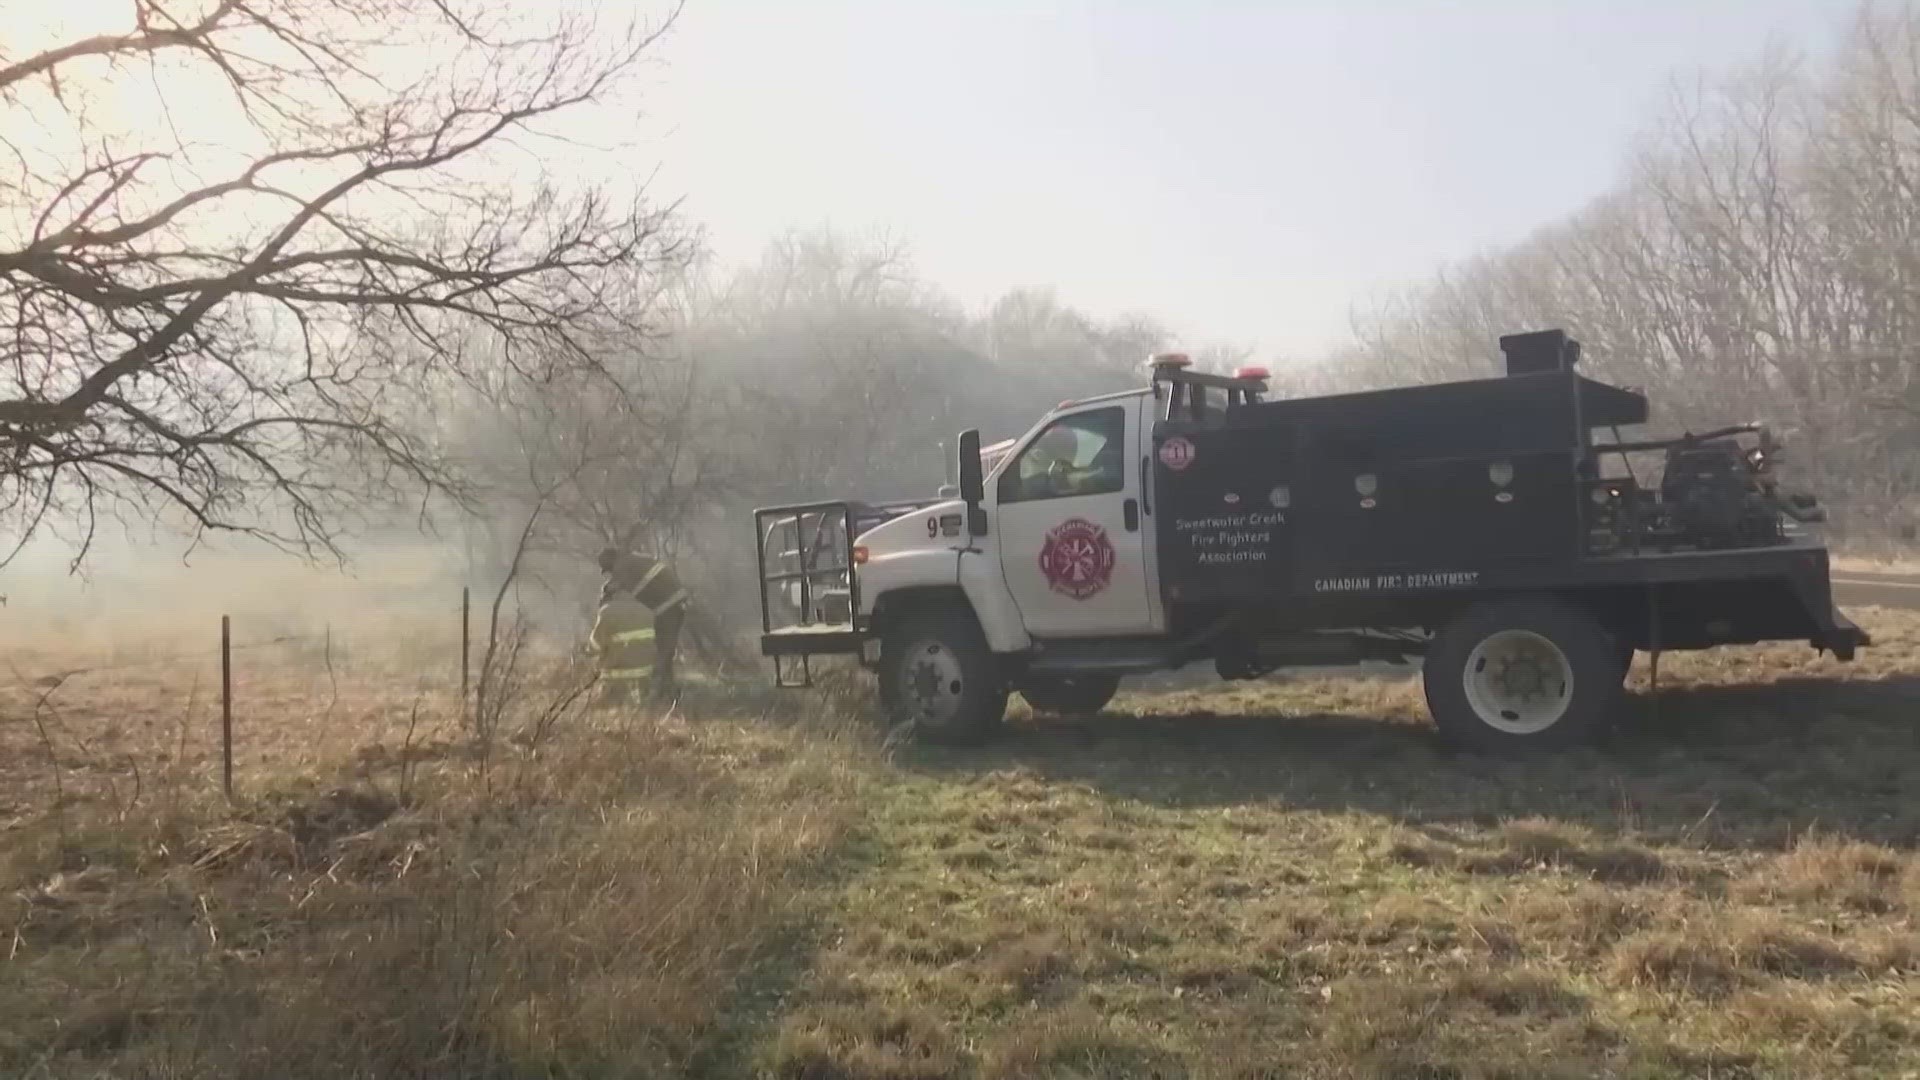 Fire crews in Canadian, Texas fought a spot fire in a wildlife management area , saving cattle. The spot fire is part of the state's massive Smokehouse Creek fire.